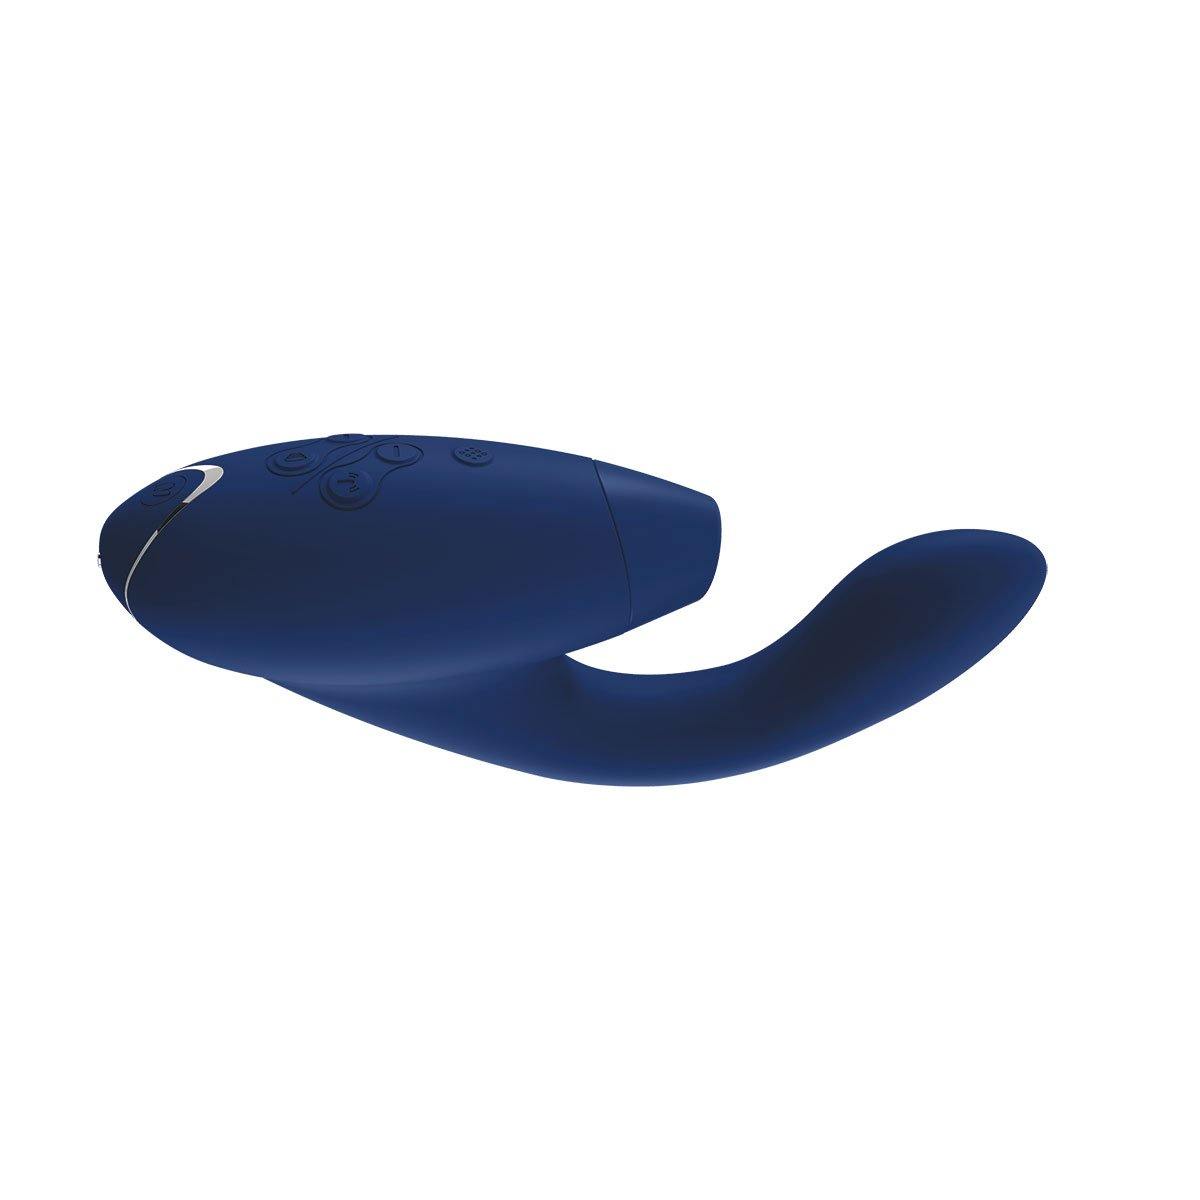 Womanizer Duo Blueberry - Buy At Luxury Toy X - Free 3-Day Shipping